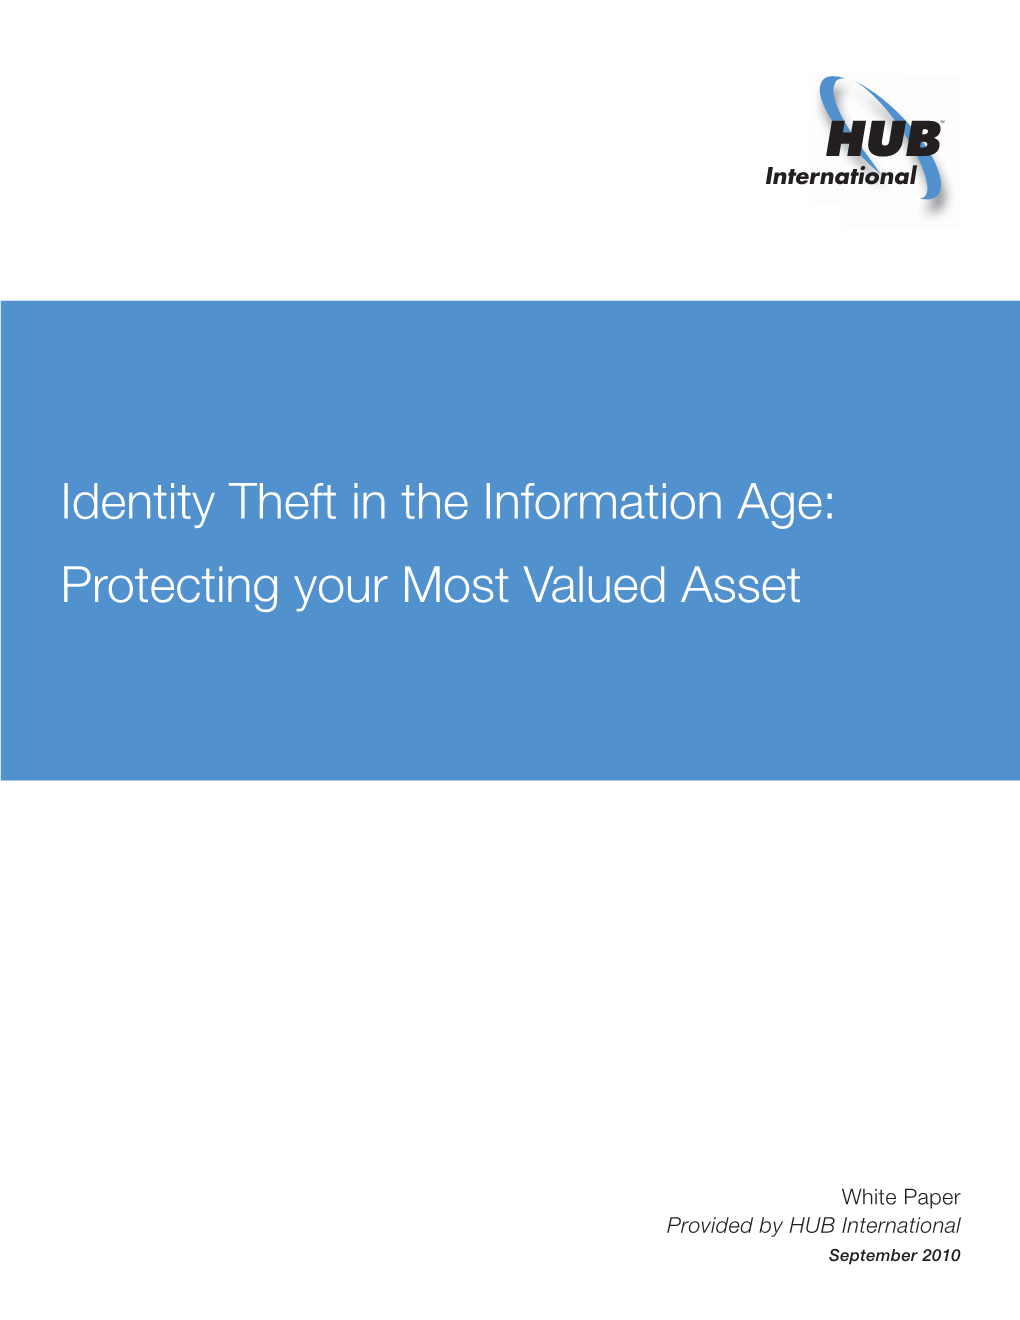 Identity Theft in the Information Age: Protecting Your Most Valued Asset